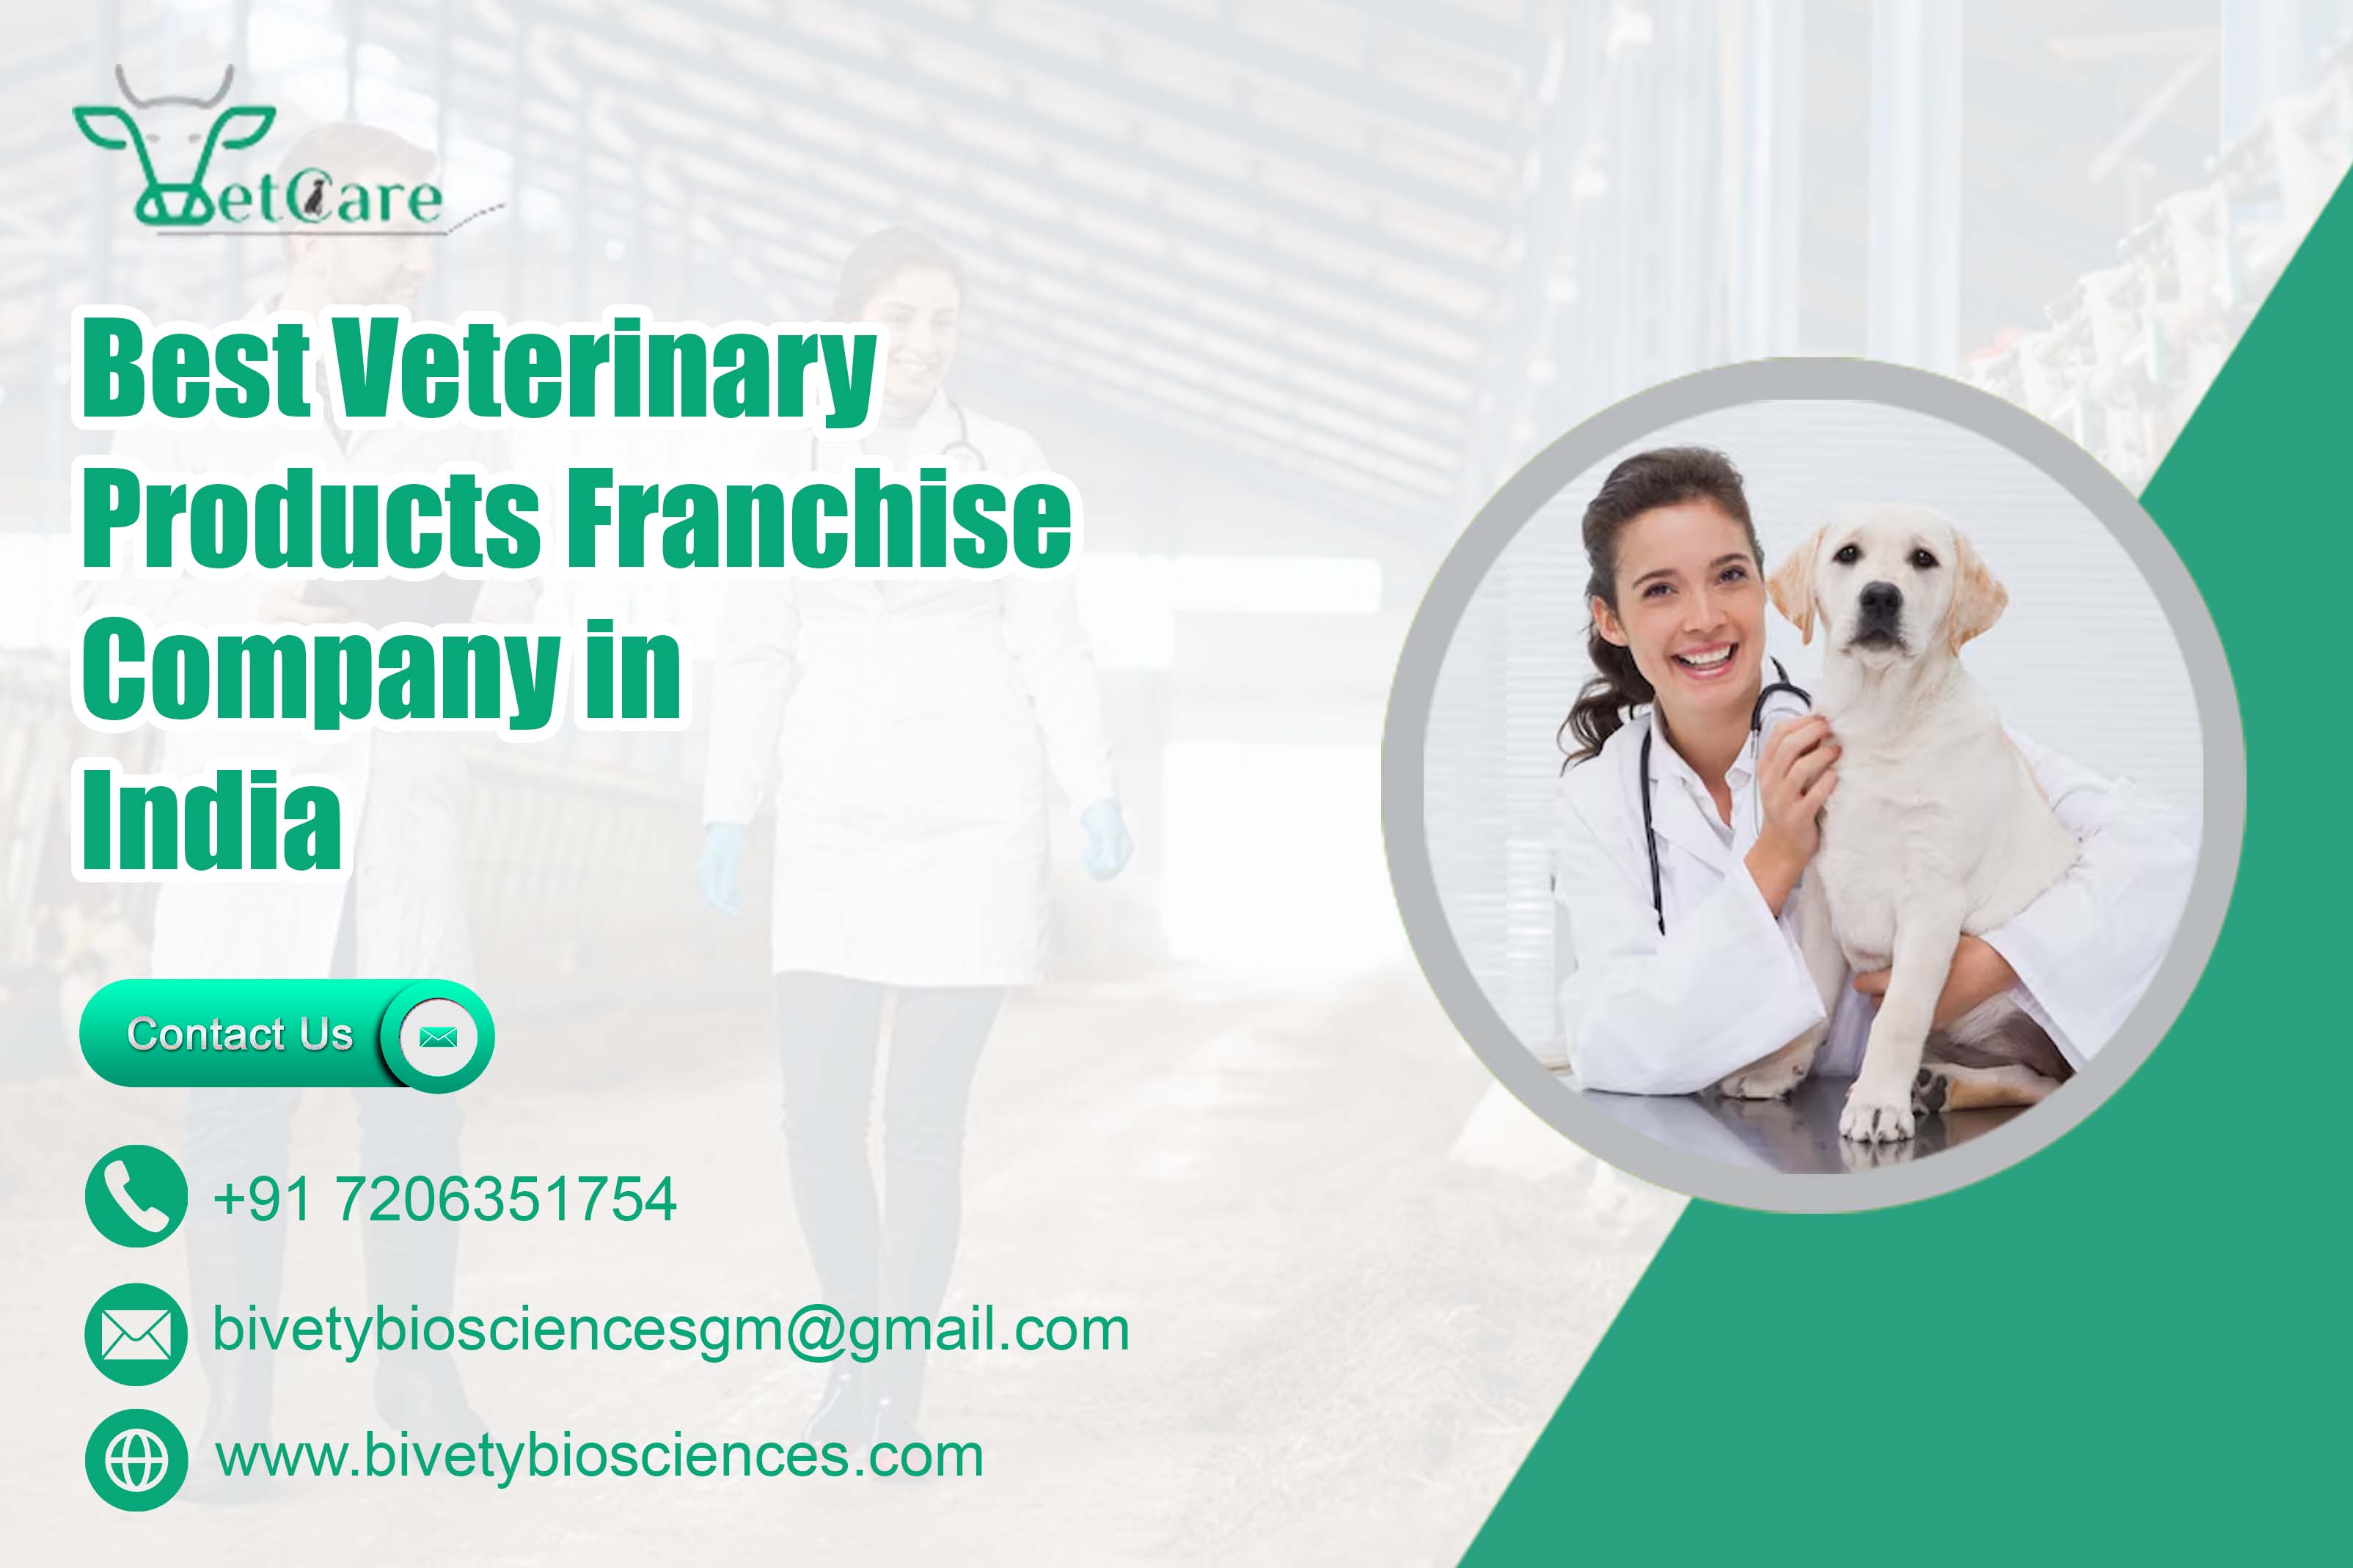 janusbiotech|Best Veterinary Products Franchise Company in India 